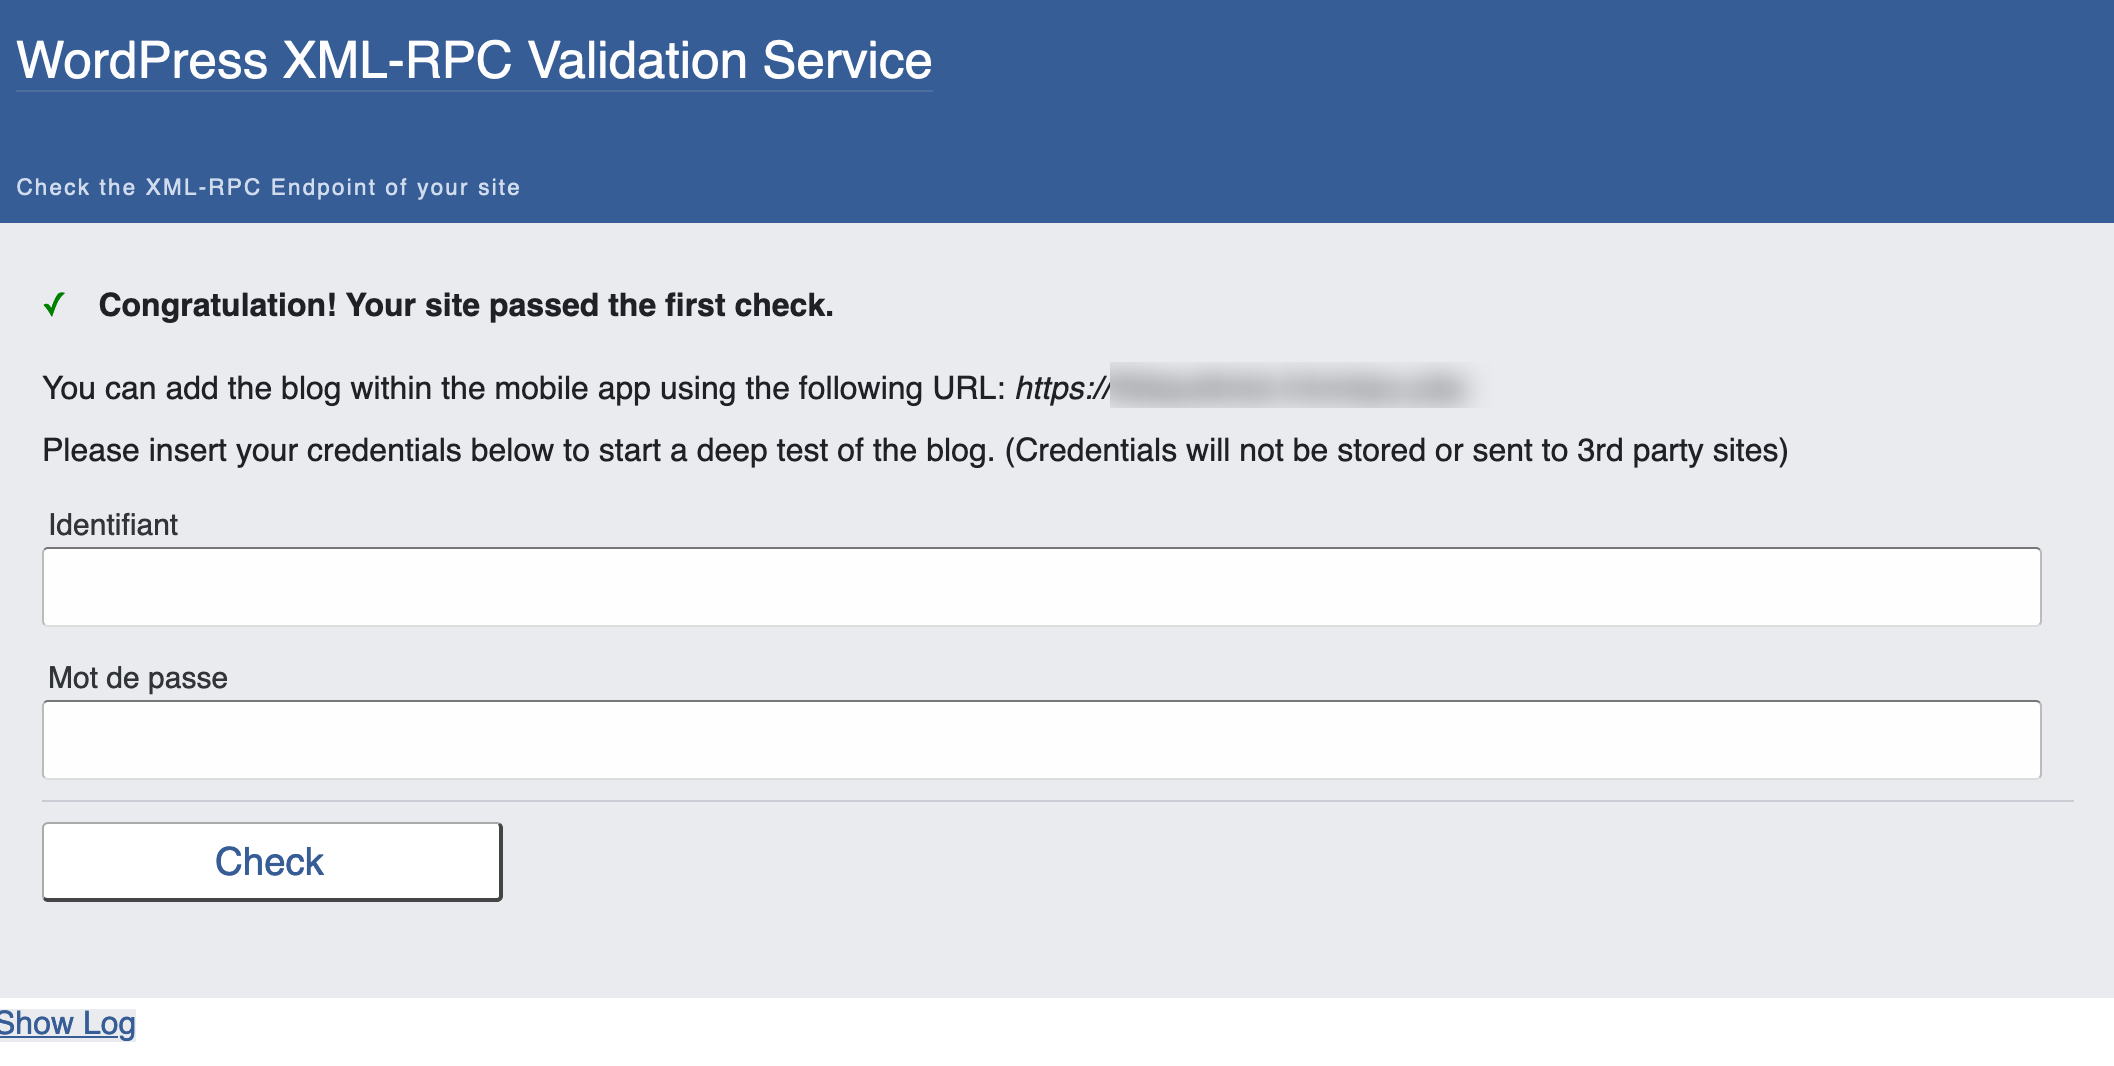 W3C's validation tool shows that the XML-RPC protocol is active on this site.